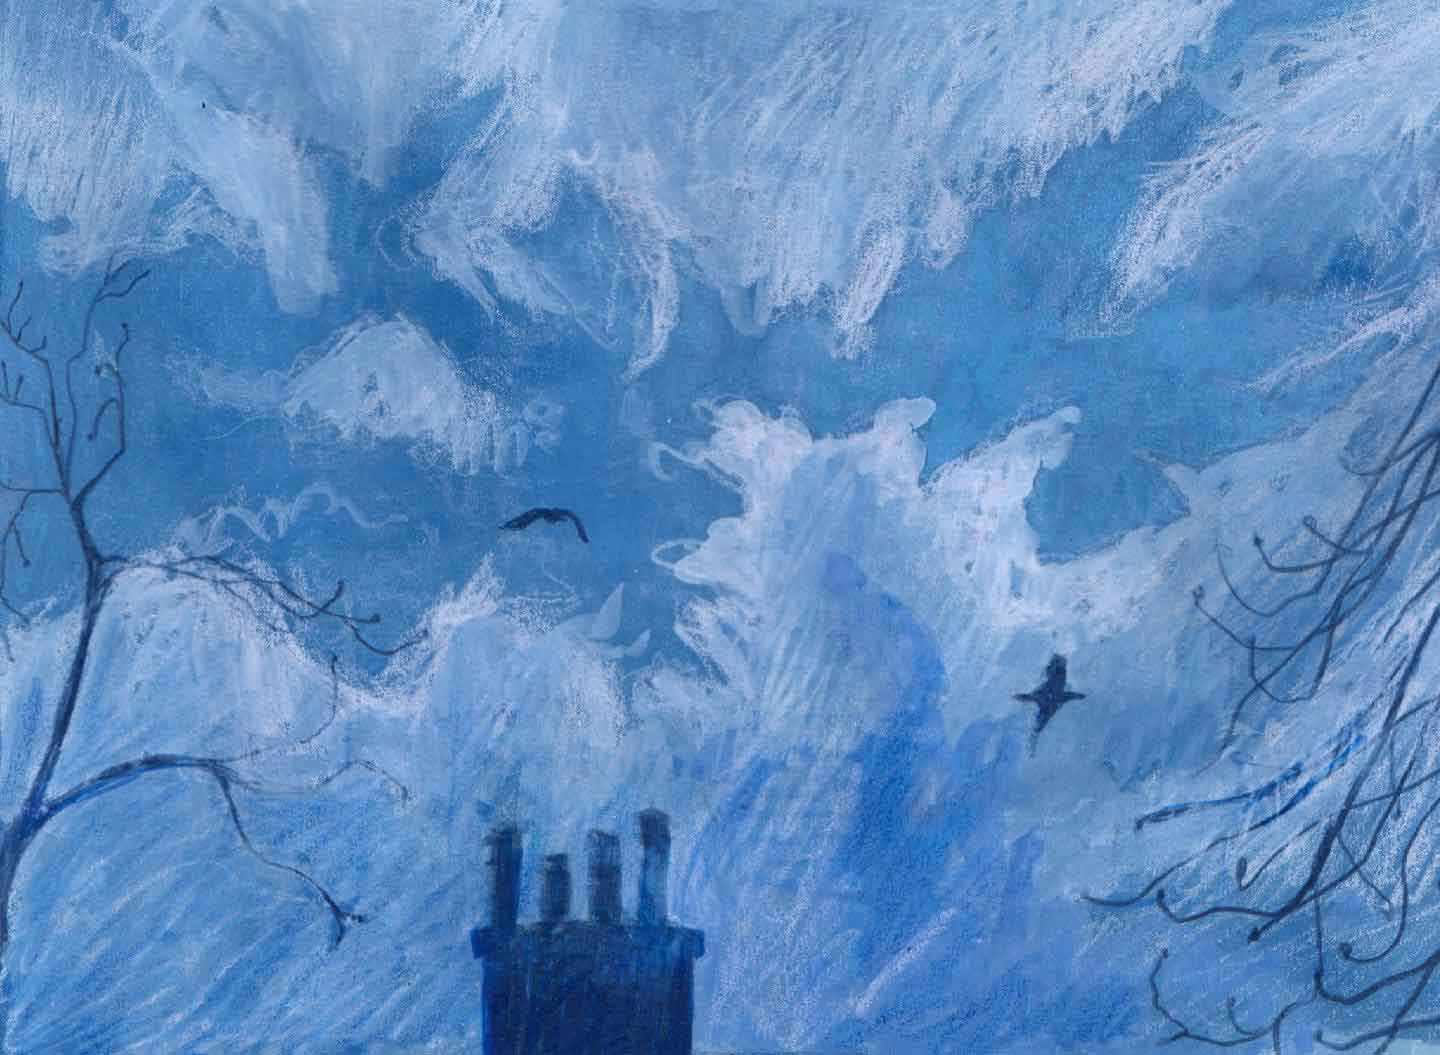 A drawing of a chimney in a wide sky punctuated by clouds and small birds flying around.